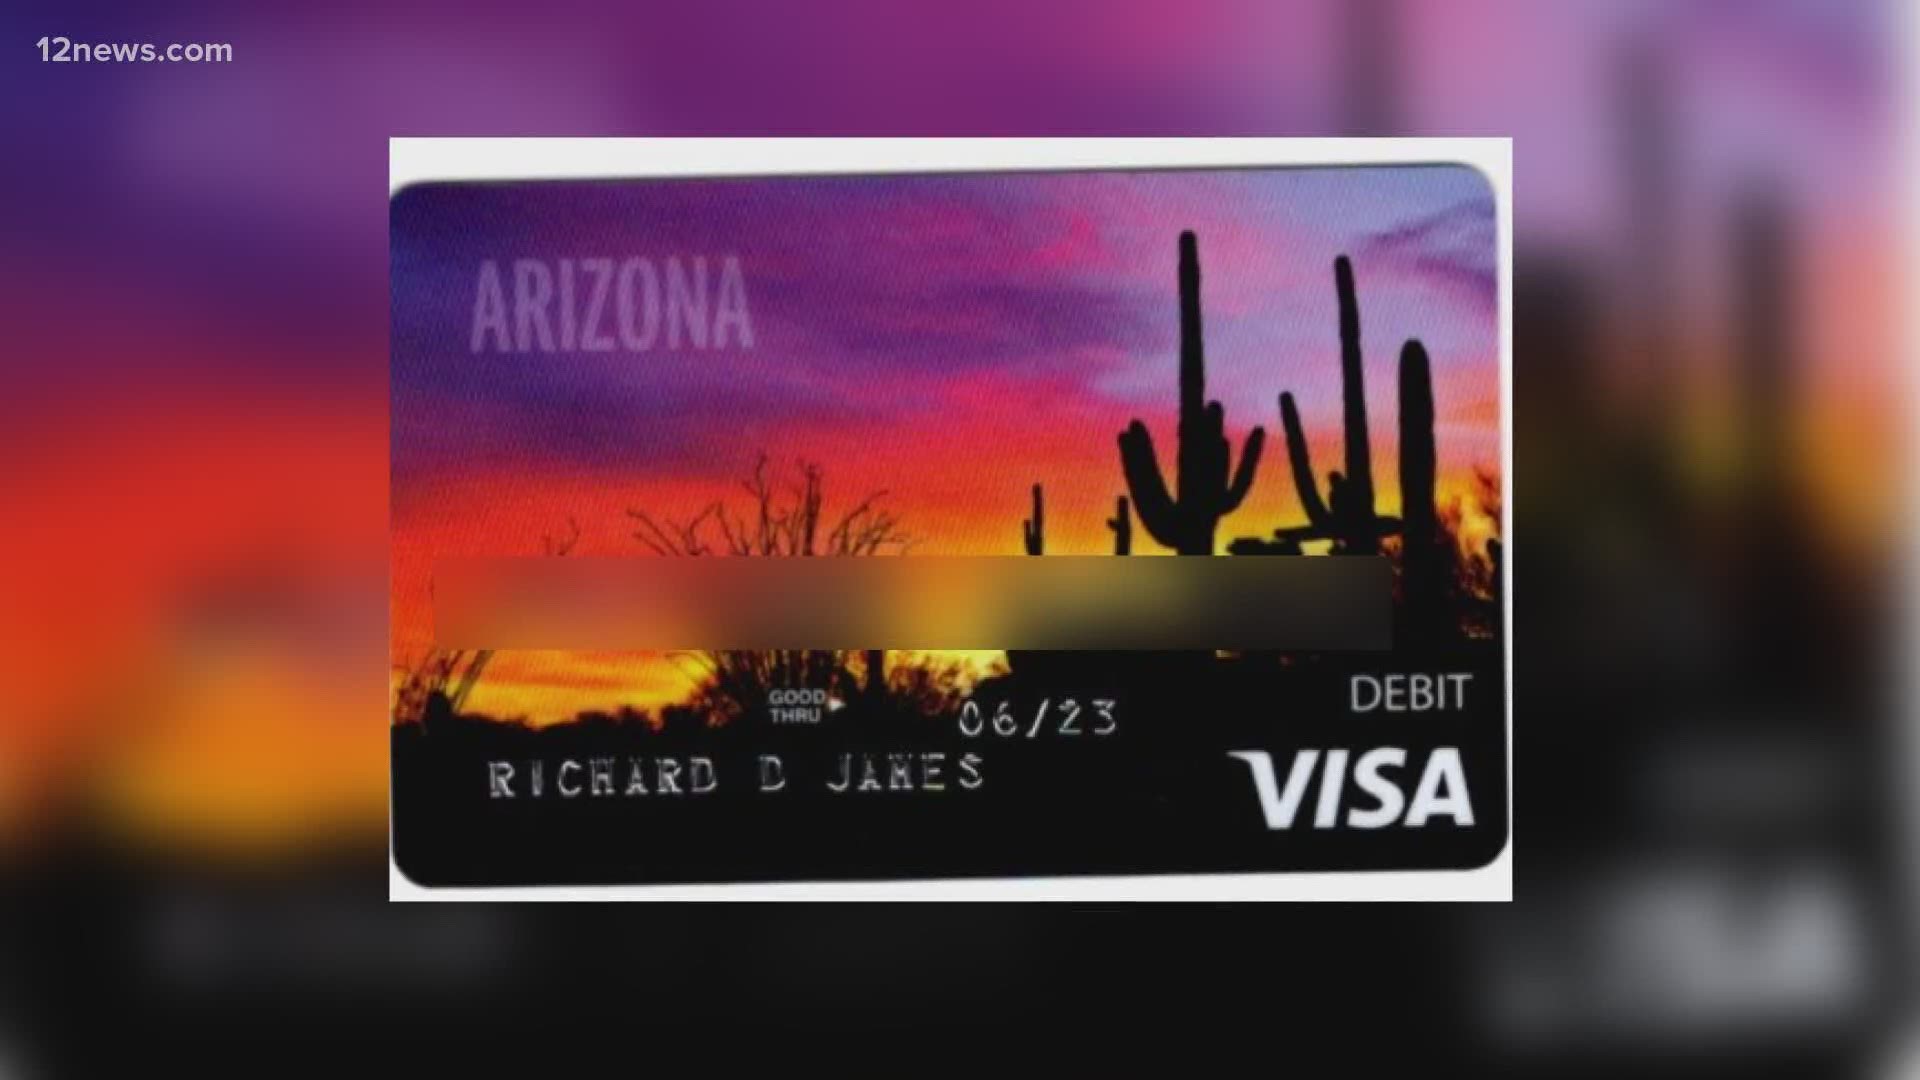 People who haven't filed an unemployment claim say they're getting debit cards from Arizona's Dept. of Economic Security. DES says they are victims of identity theft